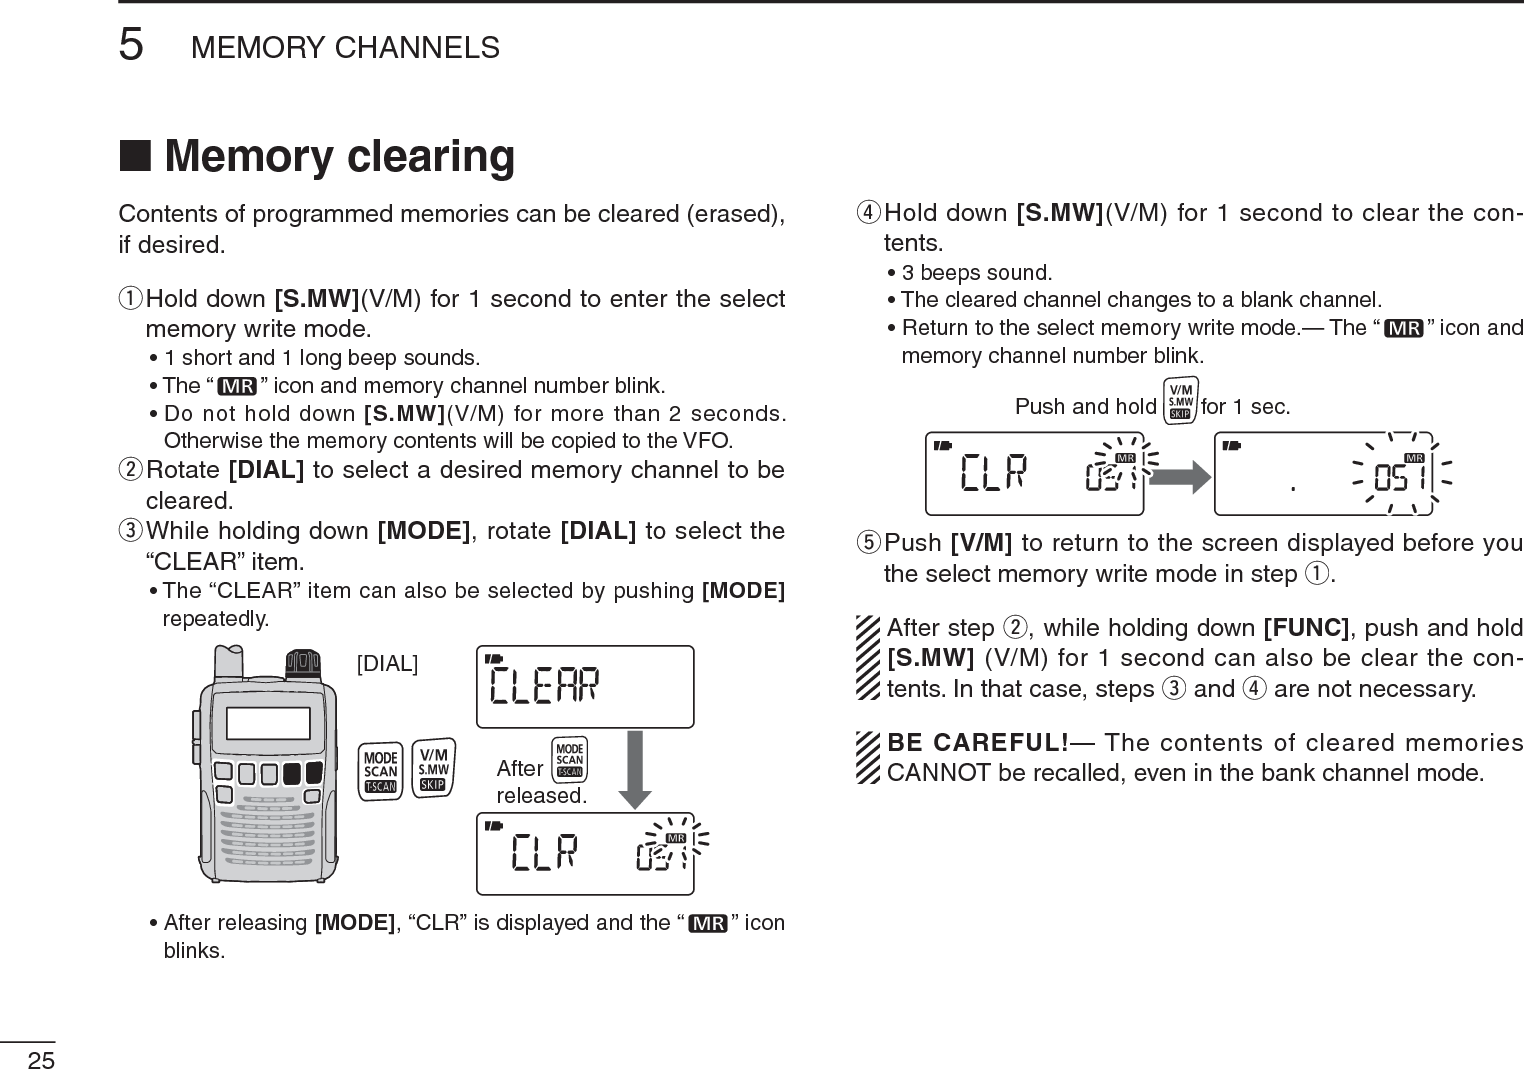 255MEMORY CHANNELSN Memory clearingContents of programmed memories can be cleared (erased), if desired.q  Hold down [S.MW](V/M) for 1 second to enter the select memory write mode.• 1 short and 1 long beep sounds.• The “ ” icon and memory channel number blink.• Do not hold down [S.MW](V/M) for more than 2 seconds. Otherwise the memory contents will be copied to the VFO.w  Rotate [DIAL] to select a desired memory channel to be cleared.e  While holding down [MODE], rotate [DIAL] to select the “CLEAR” item.• The “CLEAR” item can also be selected by pushing [MODE]repeatedly.[DIAL]Afterreleased.• After releasing [MODE], “CLR” is displayed and the “ ” icon blinks.r  Hold down [S.MW](V/M) for 1 second to clear the con-tents.• 3 beeps sound.• The cleared channel changes to a blank channel.• Return to the select memory write mode.— The “ ” icon and memory channel number blink. Push and hold       for 1 sec.t  Push [V/M] to return to the screen displayed before you the select memory write mode in step q.After step w, while holding down [FUNC], push and hold [S.MW] (V/M) for 1 second can also be clear the con-tents. In that case, steps e and r are not necessary.BE CAREFUL!— The contents of cleared memories CANNOT be recalled, even in the bank channel mode.